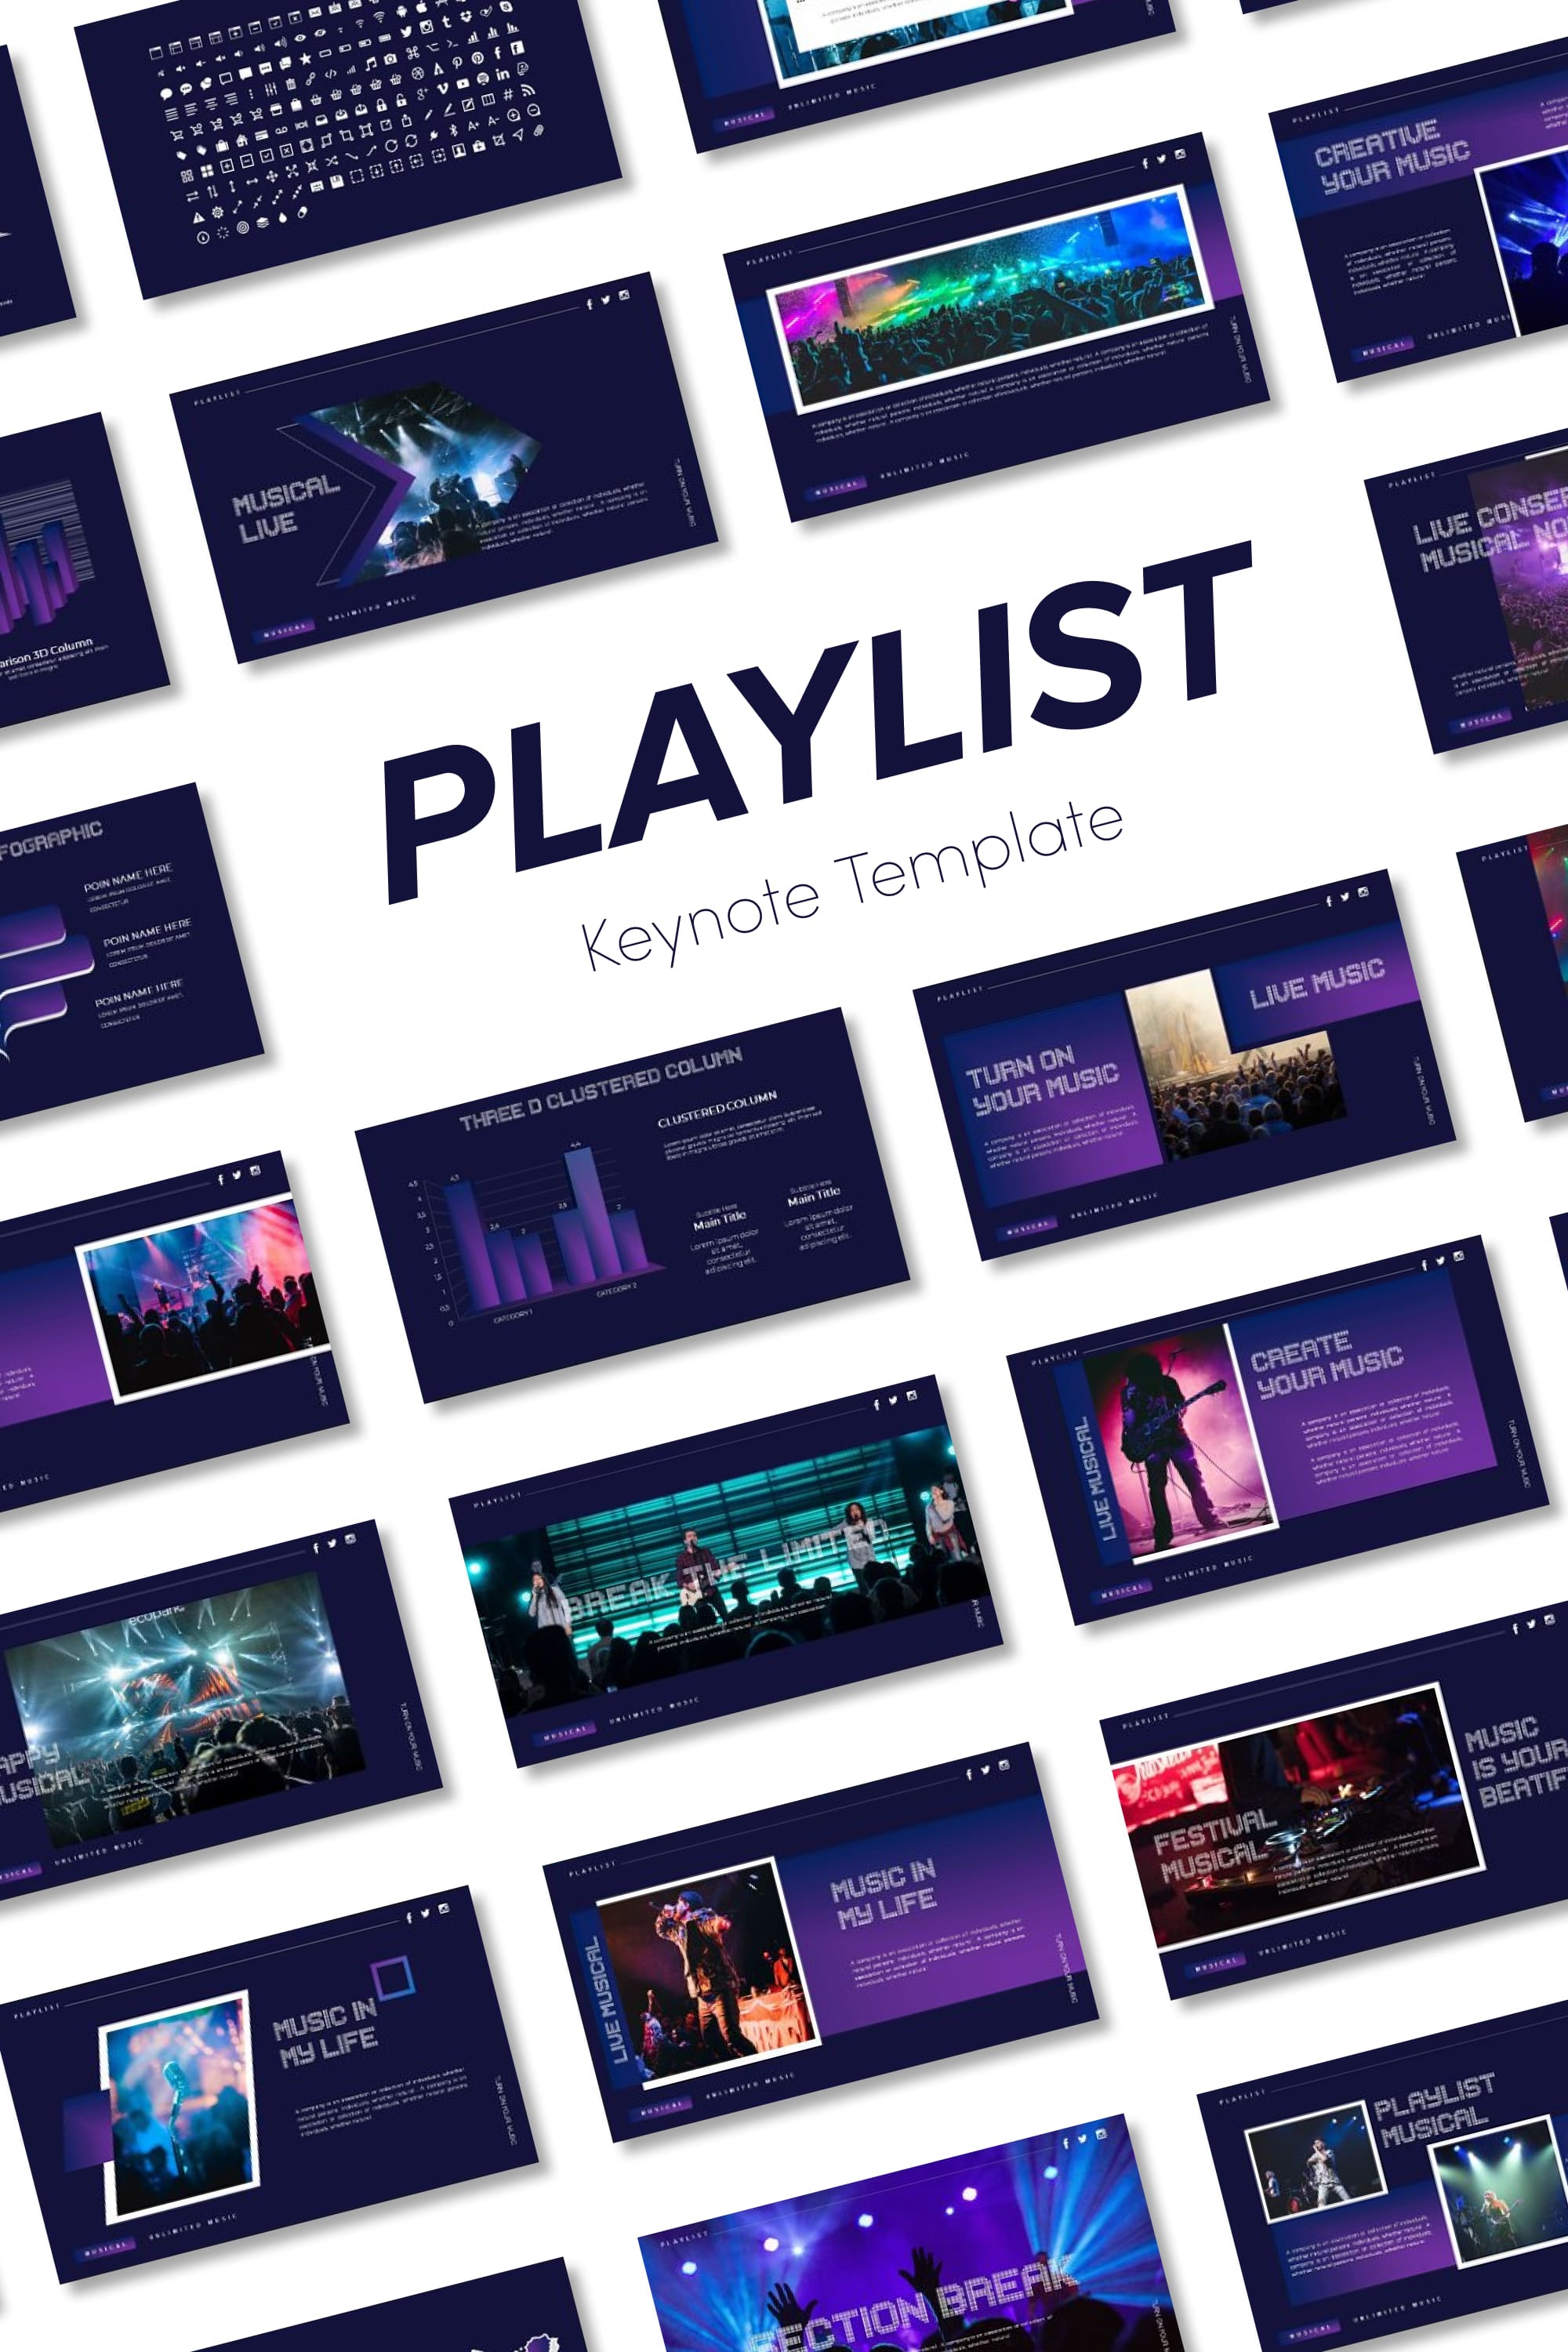 Playlist keynote template - pinterest image preview.